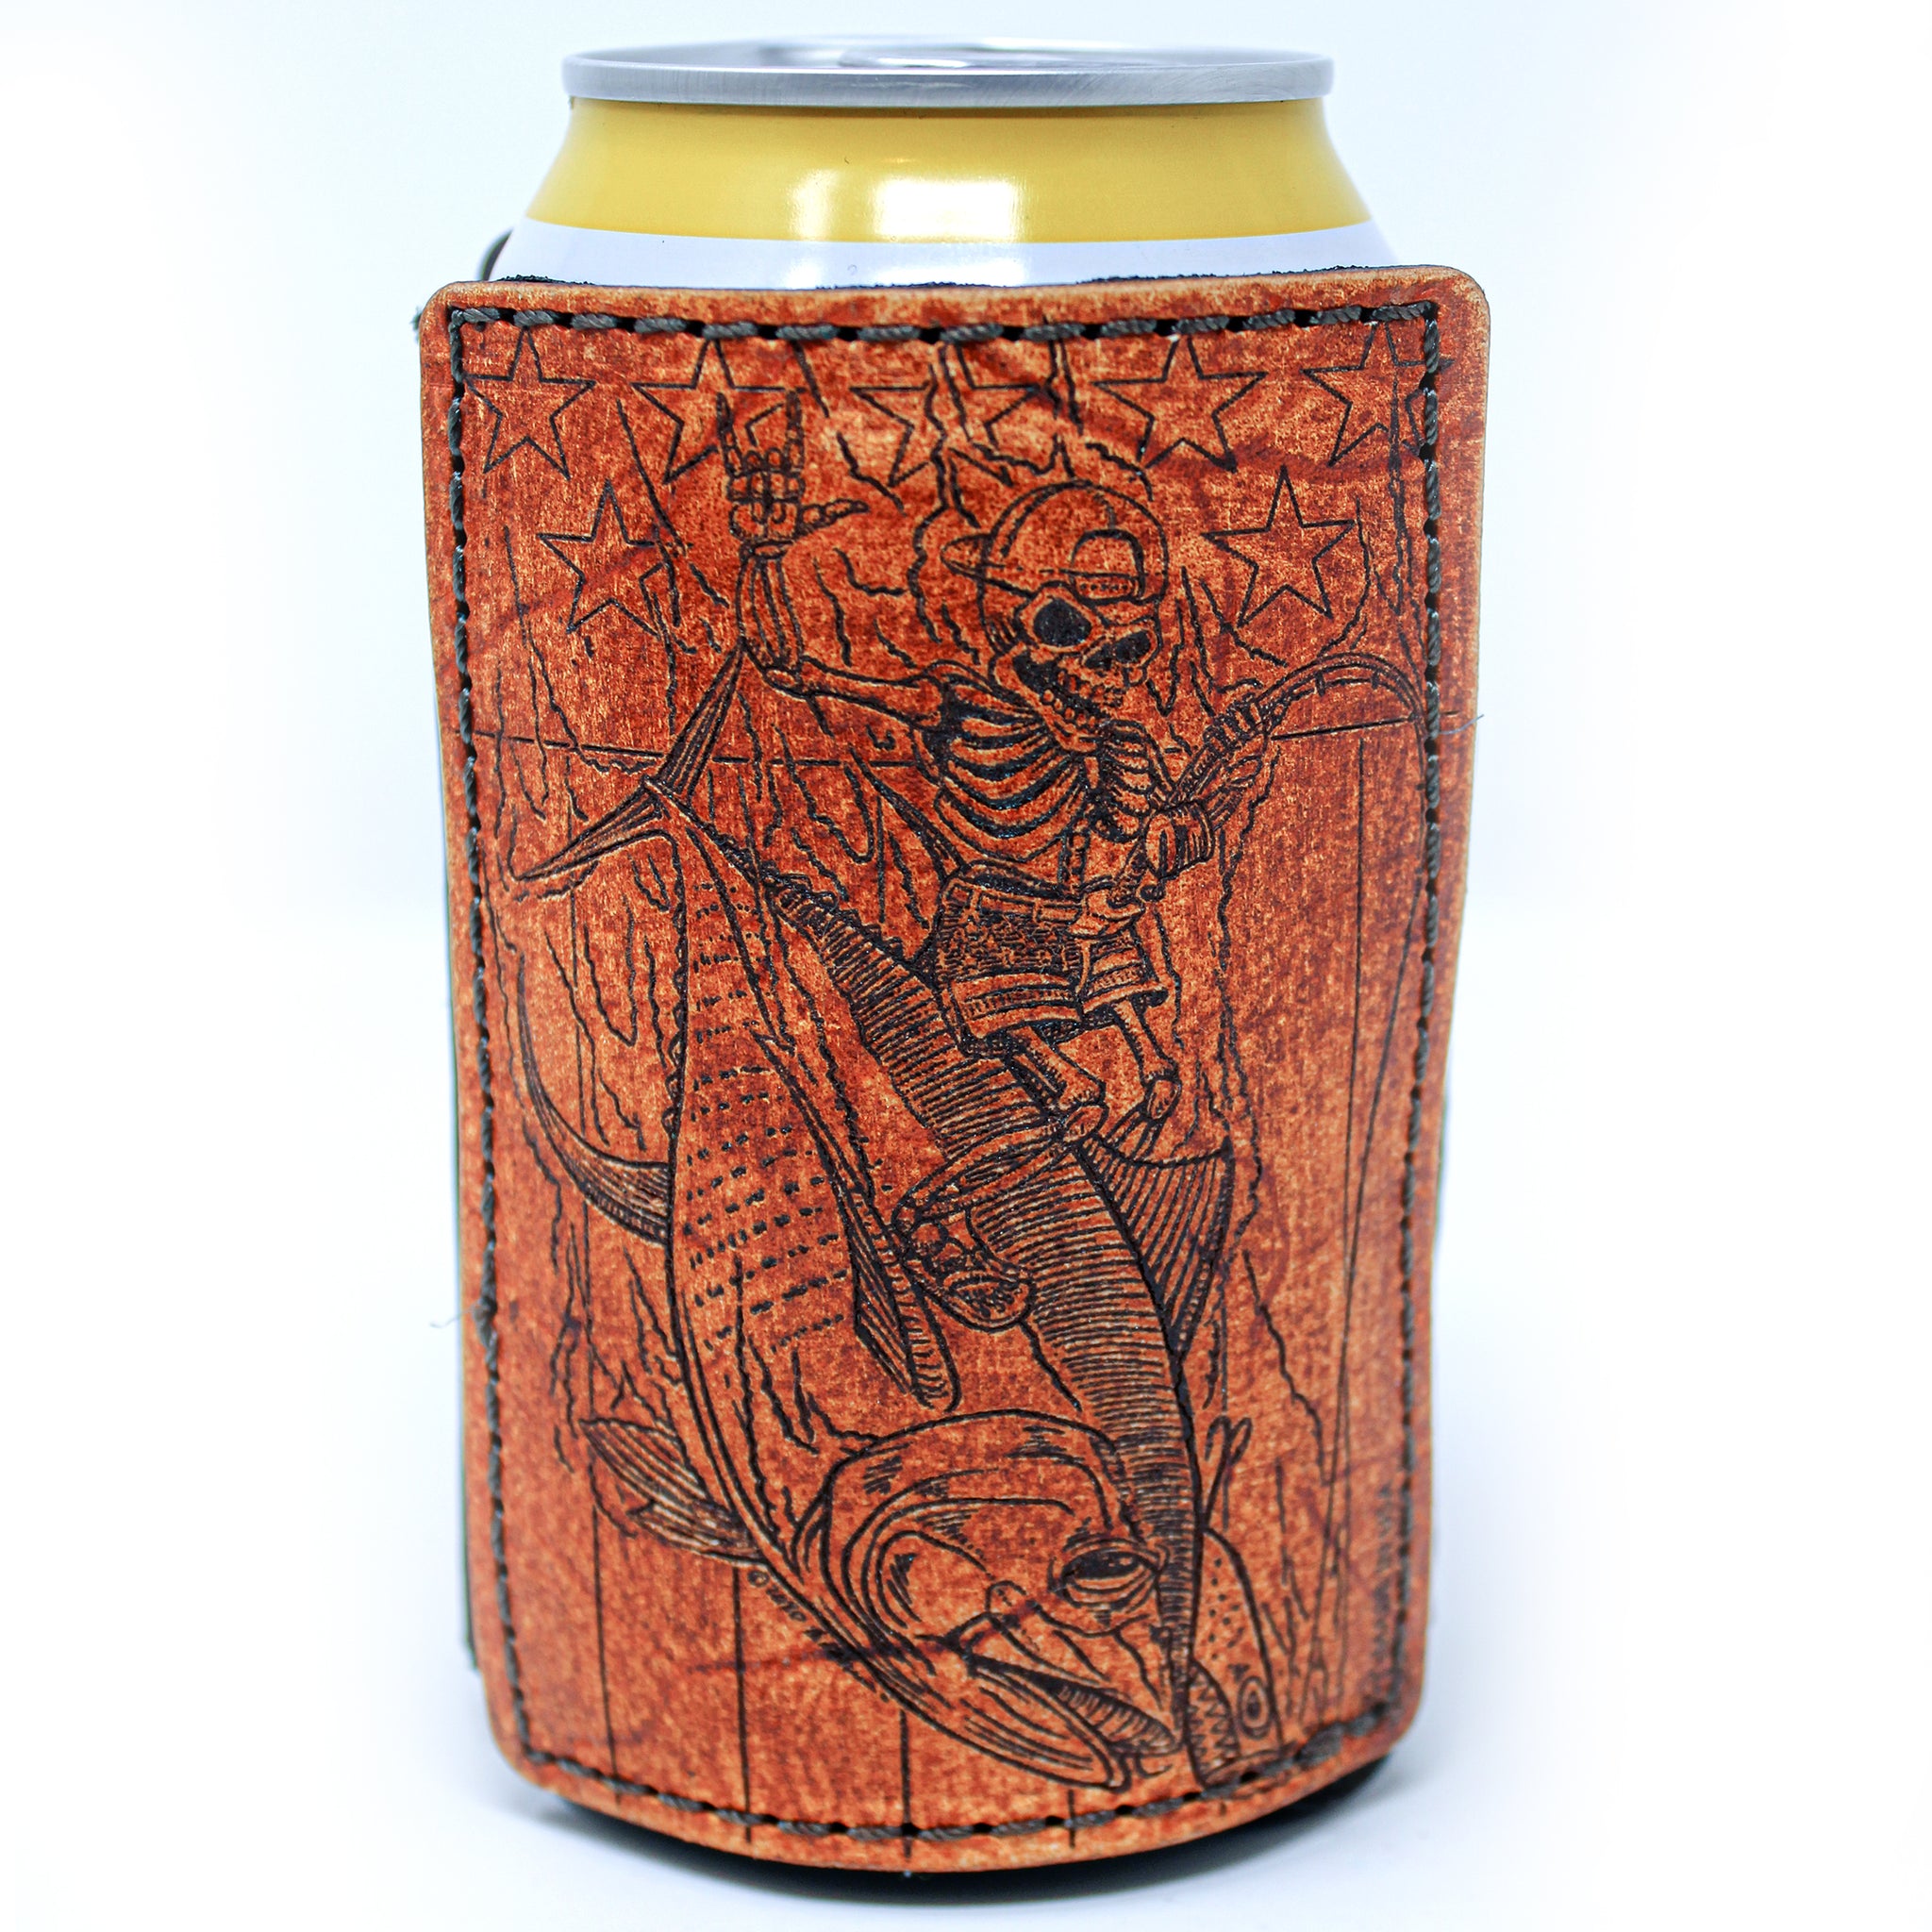 Leather Patch Drink Sleeve - Skellywag vs. Yellowfin